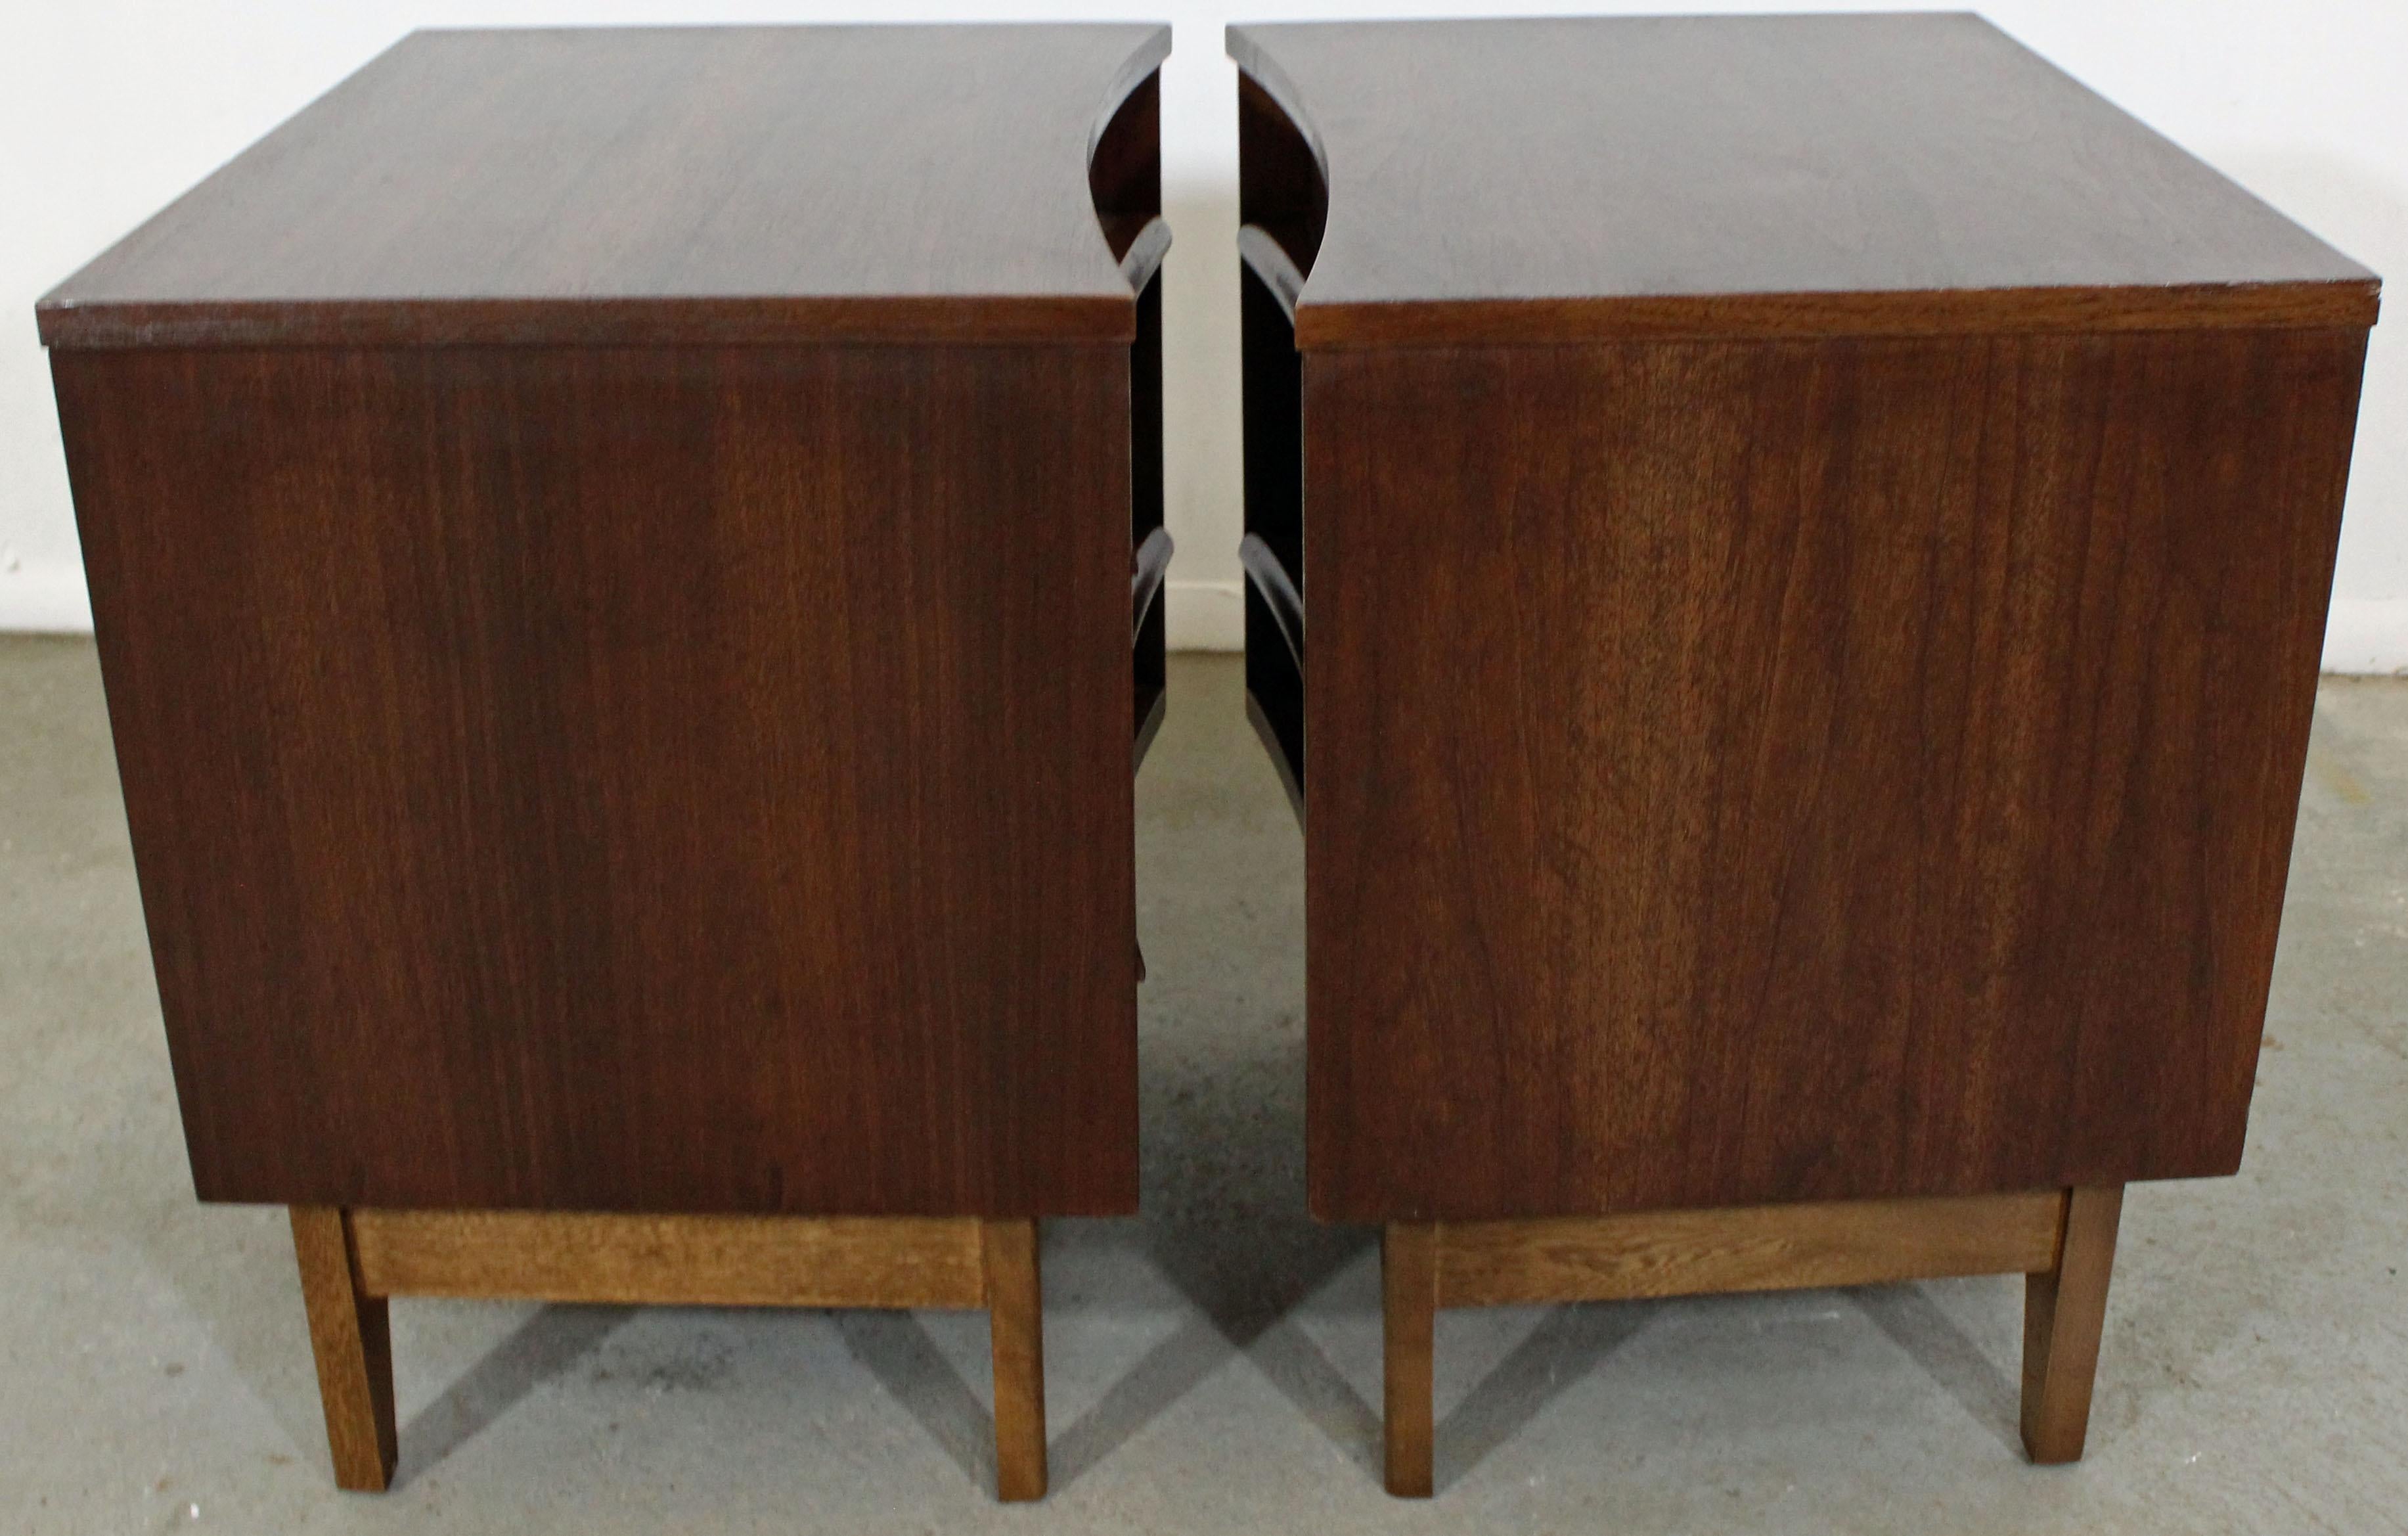 Pair of Mid-Century Modern Sculpted Concave Walnut Nightstands 1